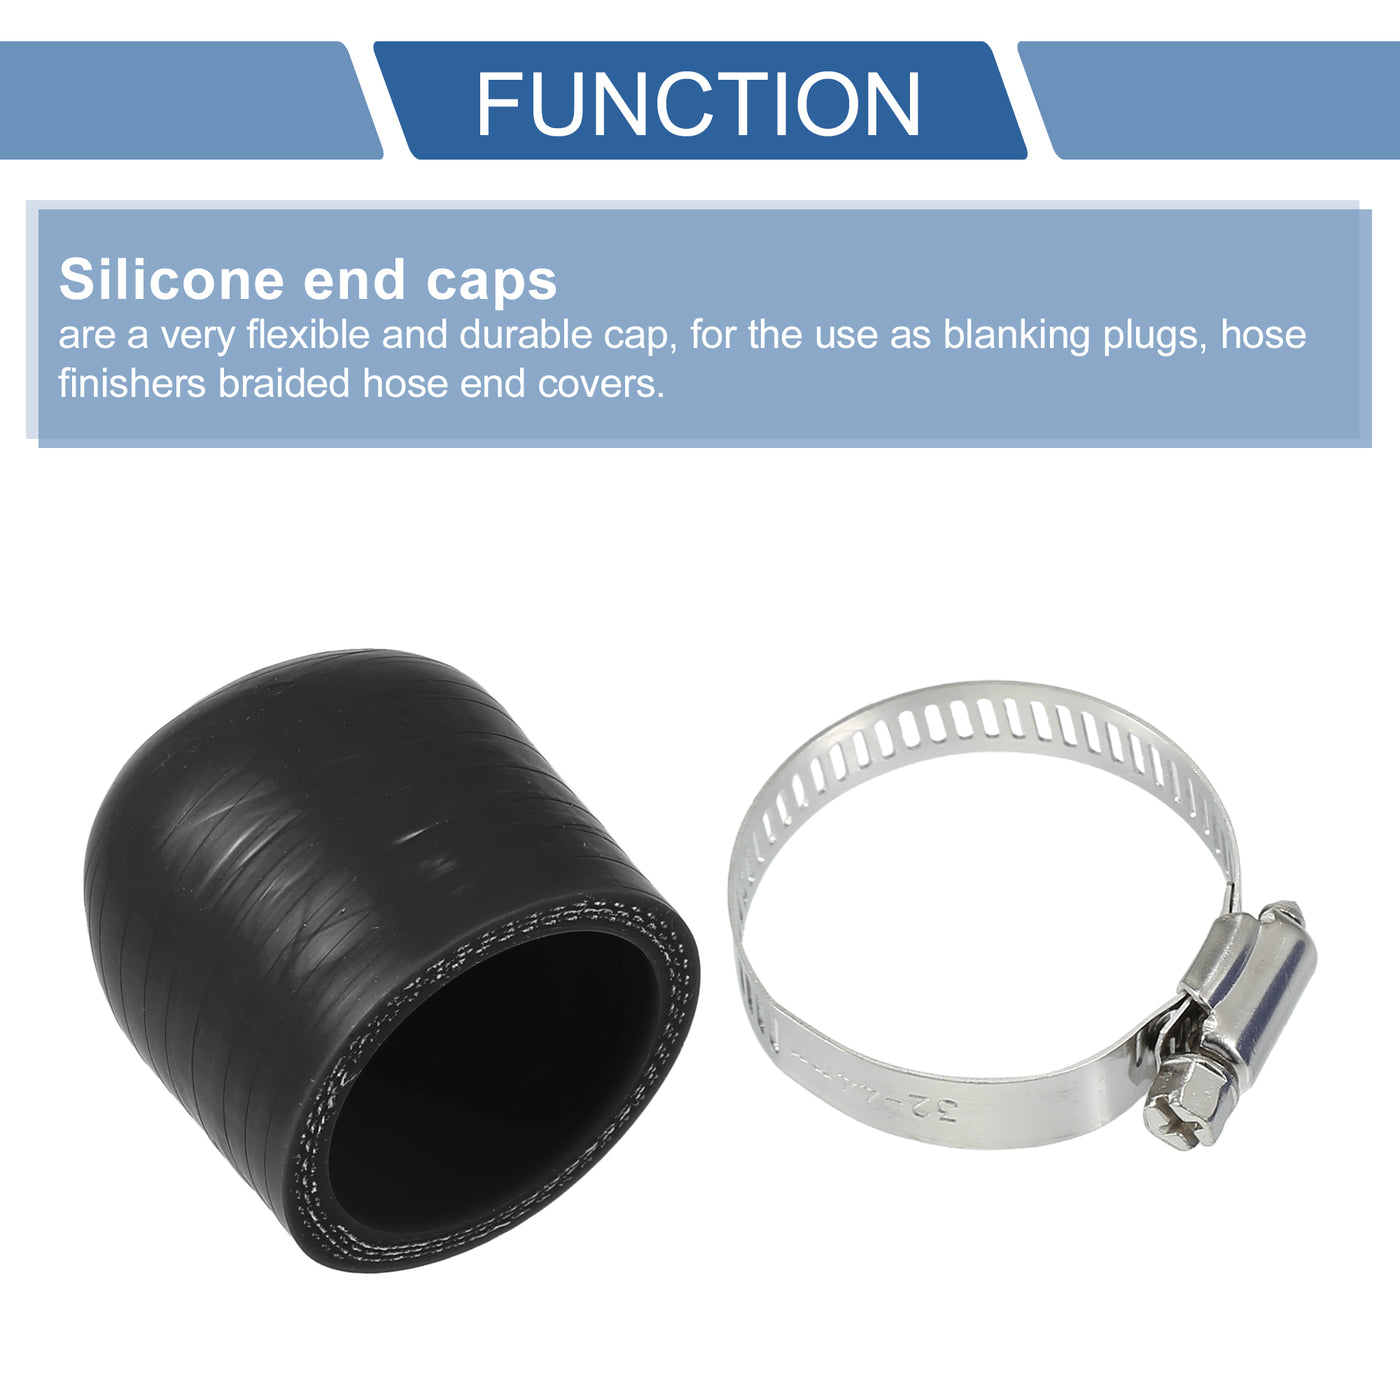 X AUTOHAUX 1 Set 30mm Length 35mm/1.38" ID Black Car Silicone Rubber Hose End Cap with Clamps Silicone Reinforced Blanking Cap for Bypass Tube Universal